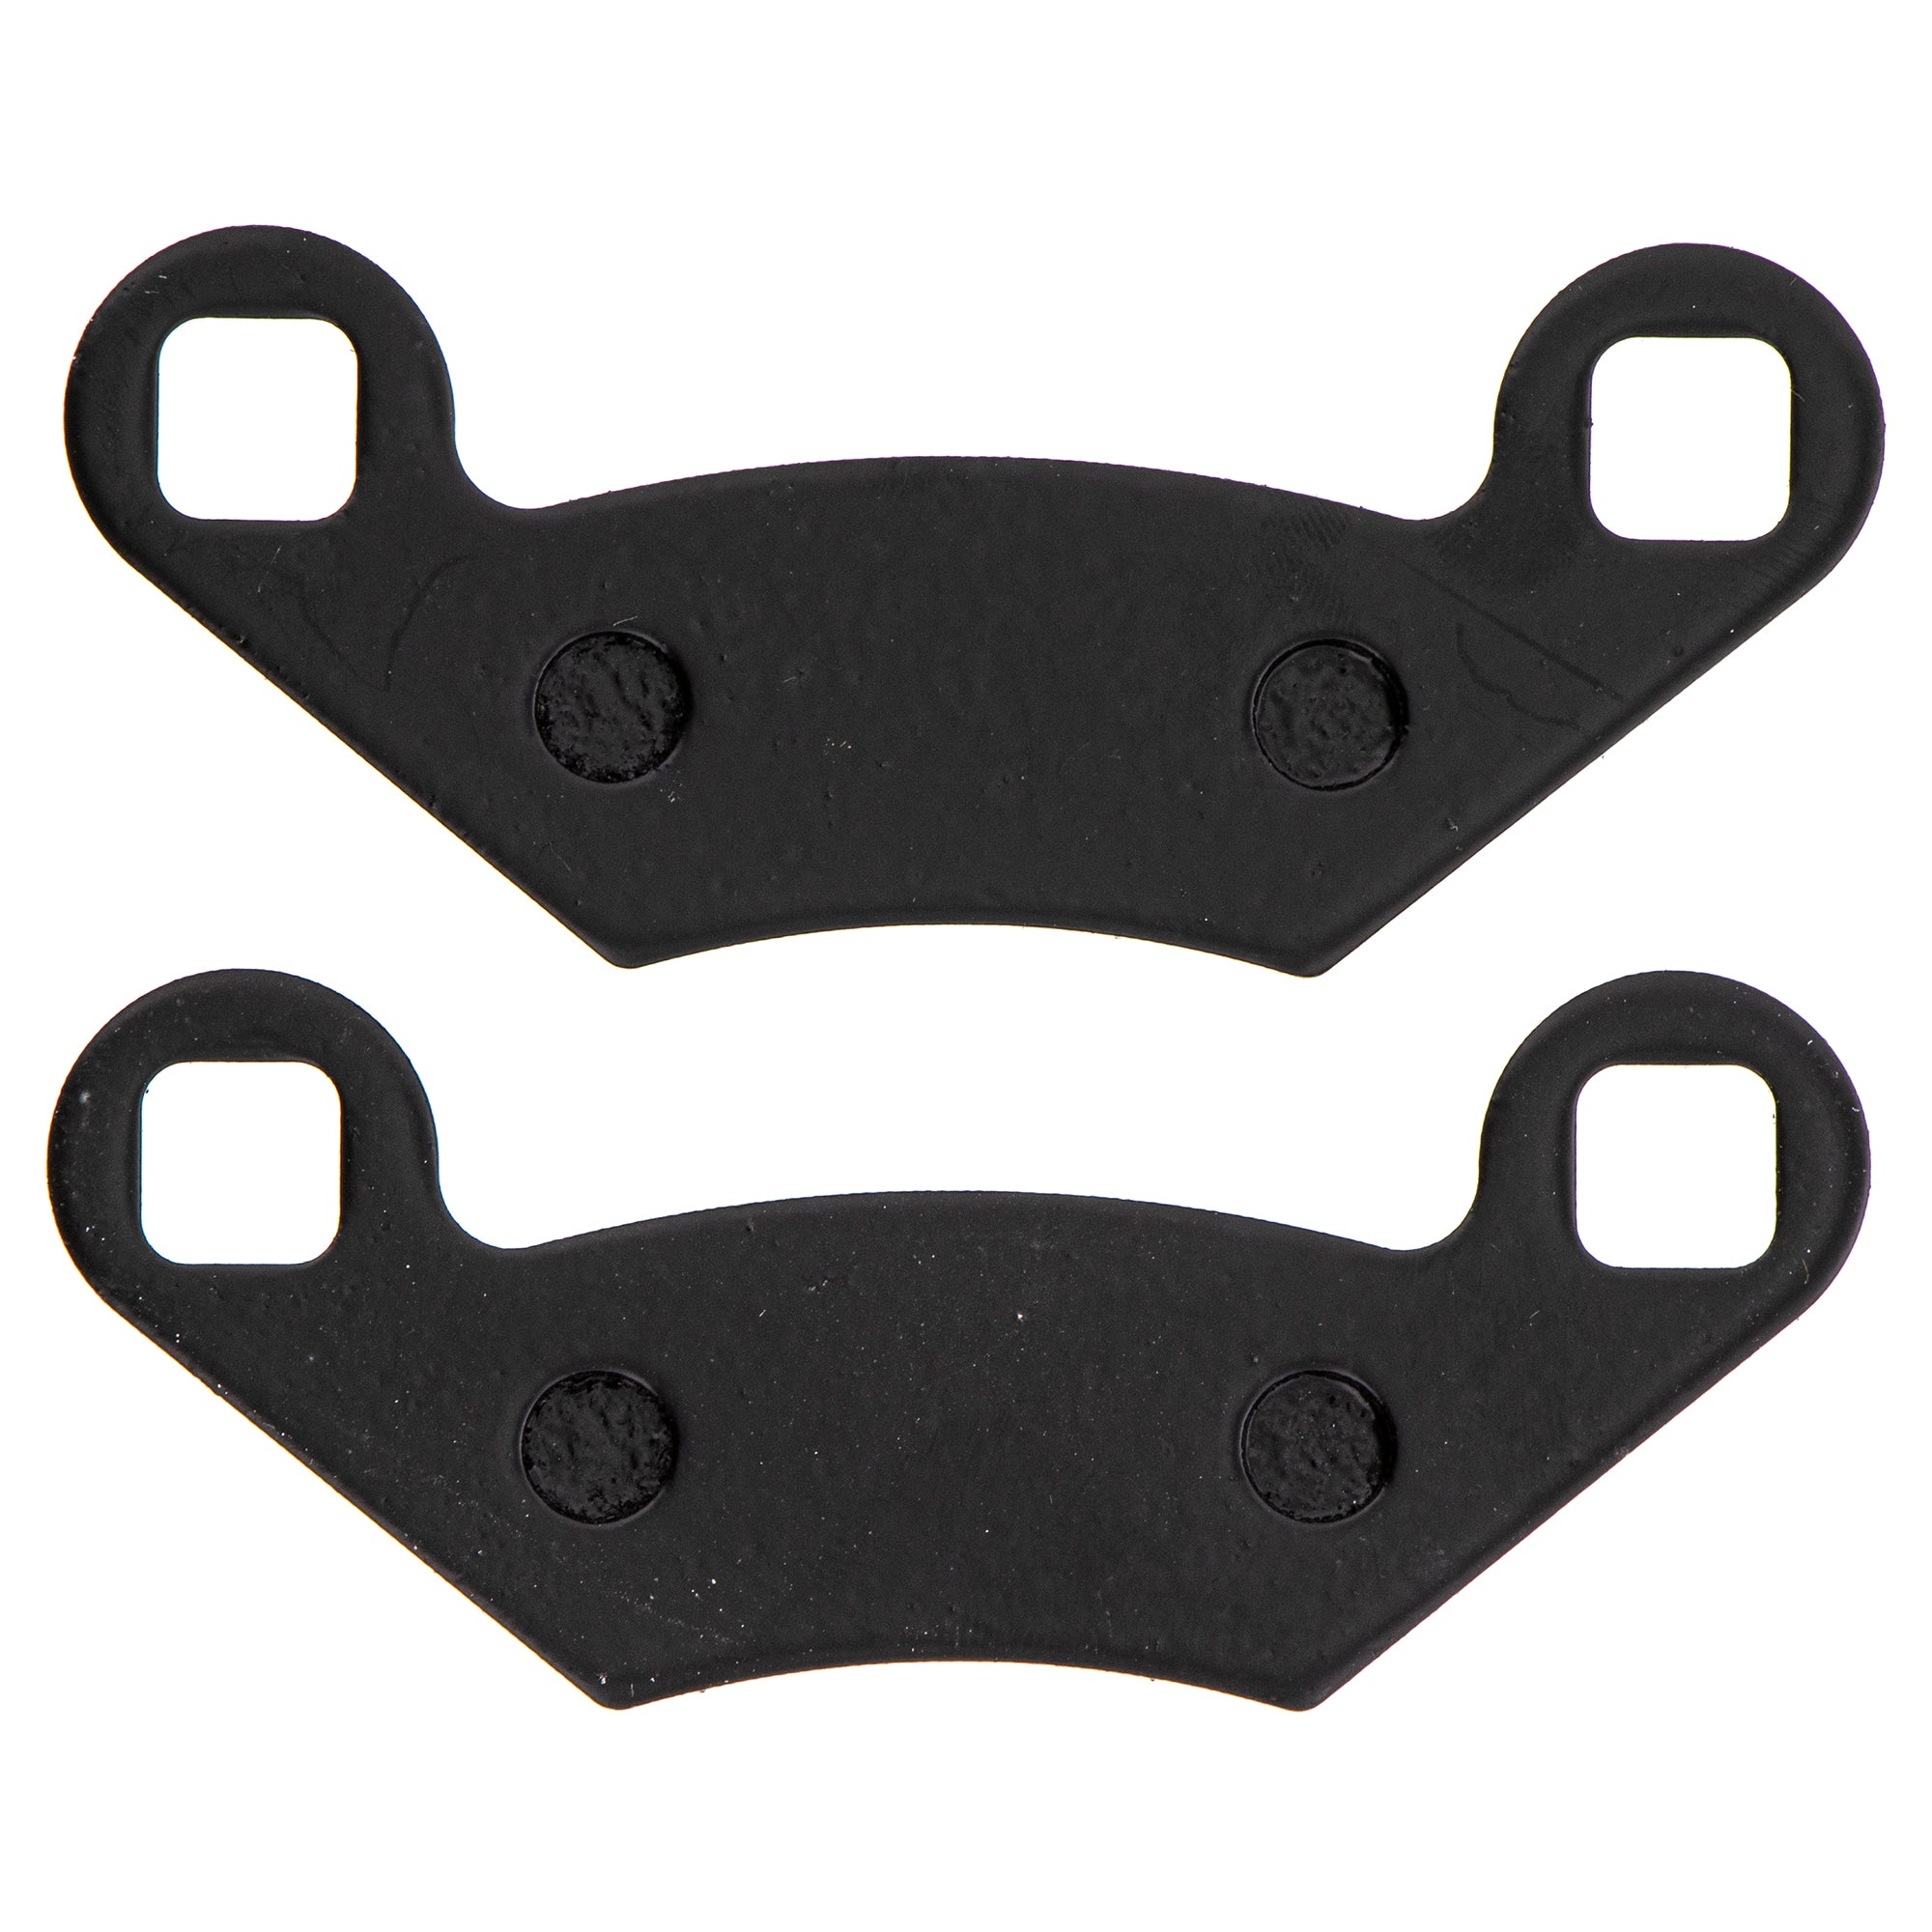 Brake Pad for Polaris Sportsman 500 400 335 Front and Rear